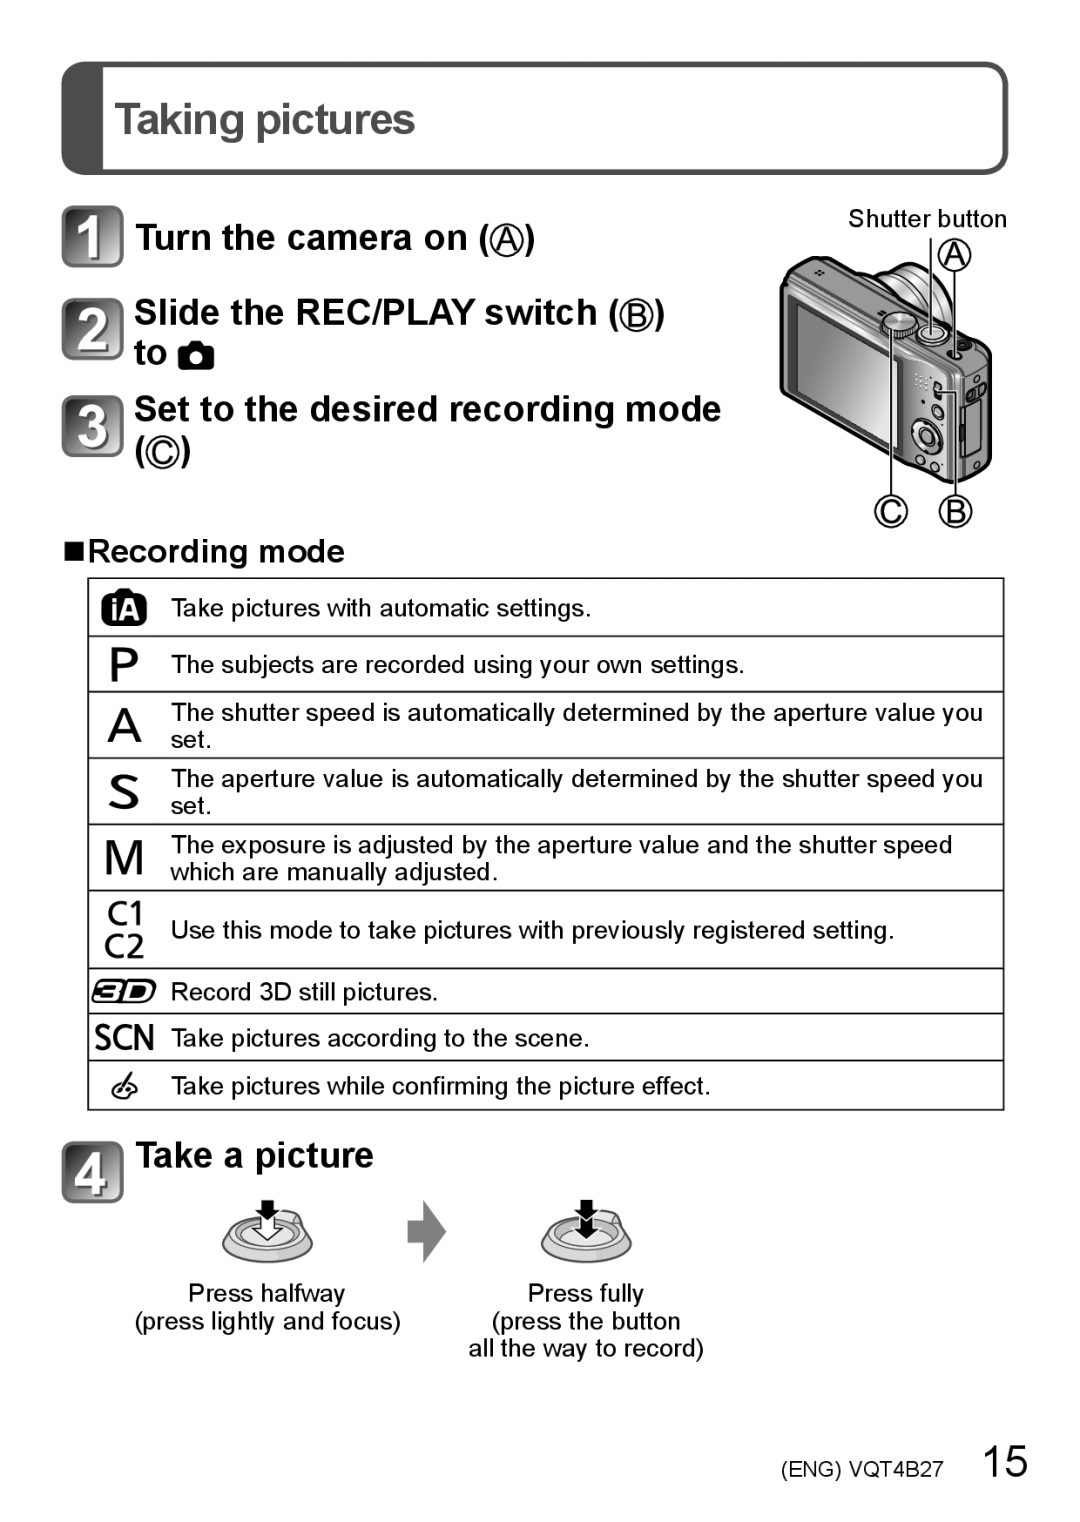 Panasonic DMC-ZS15 Taking pictures, Turn the camera on Slide the REC/PLAY switch to, Set to the desired recording mode 